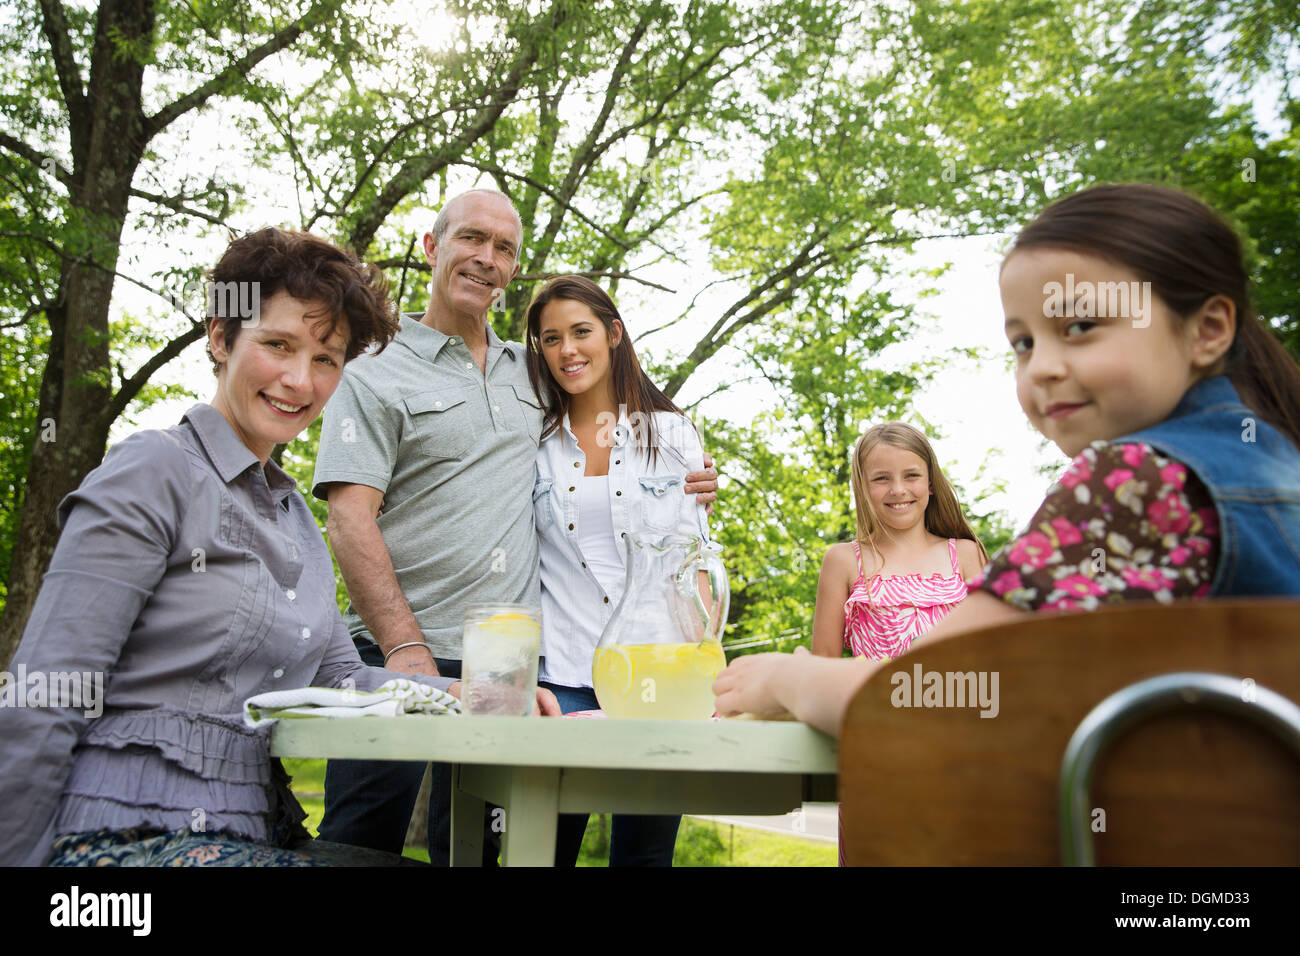 A summer family gathering at a farm. A family group, parents and children. Making fresh lemonade. Stock Photo